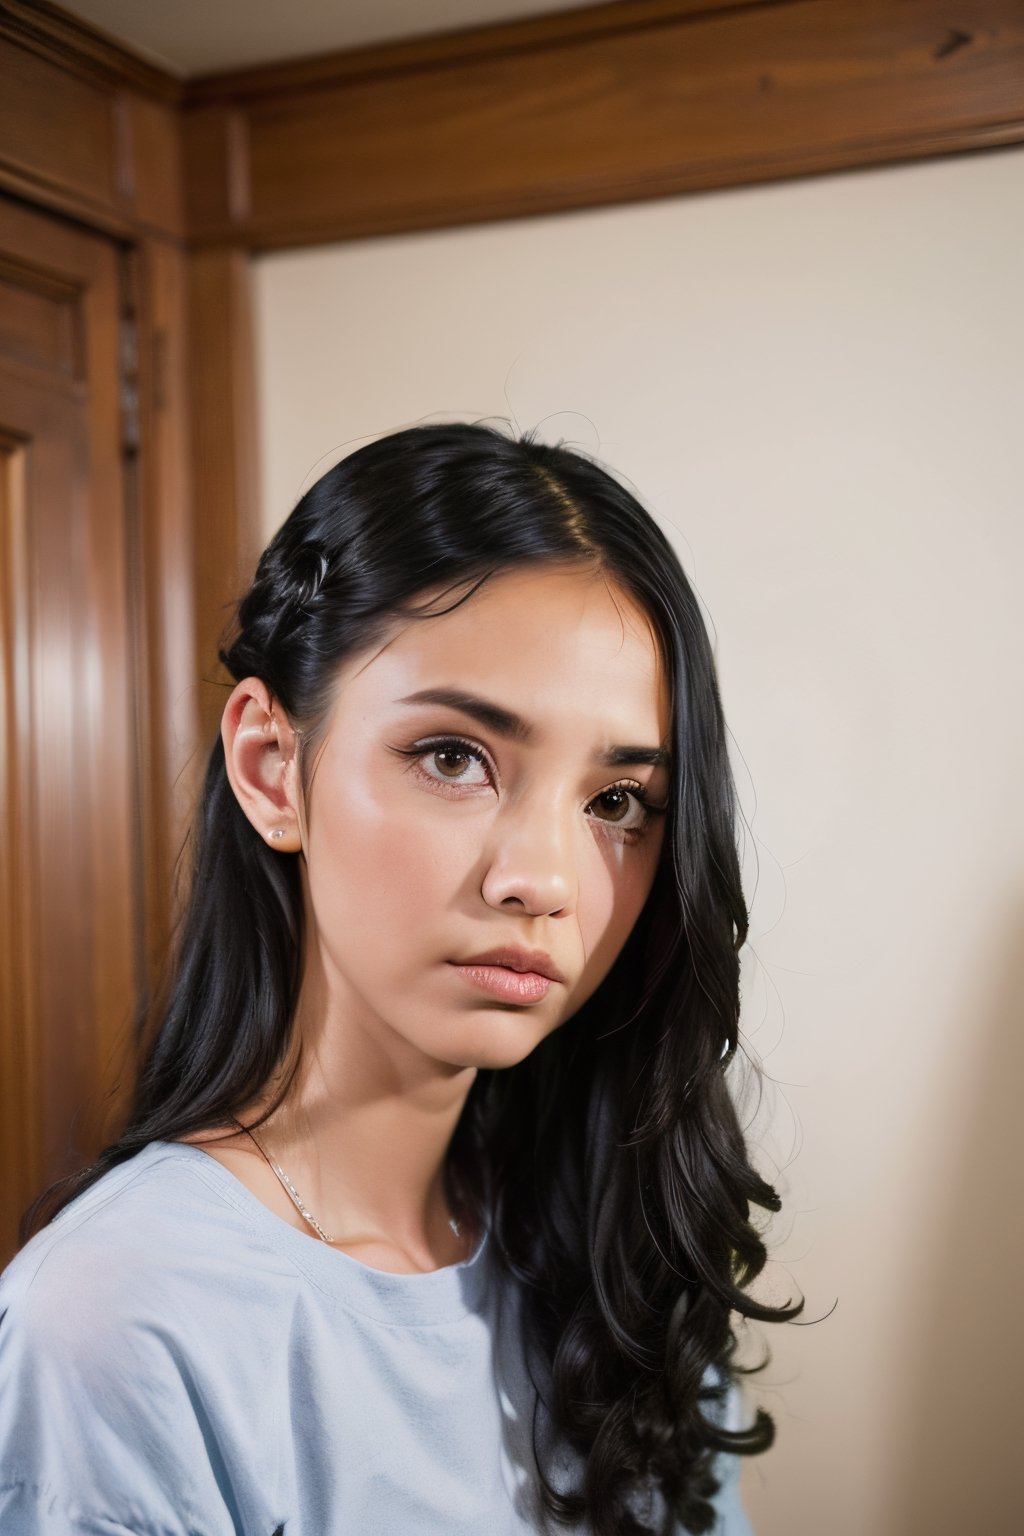 Girl, frowning eyebrows, suspicious look, sharp look, hair, portrait, perfect skin, detailing,dinda